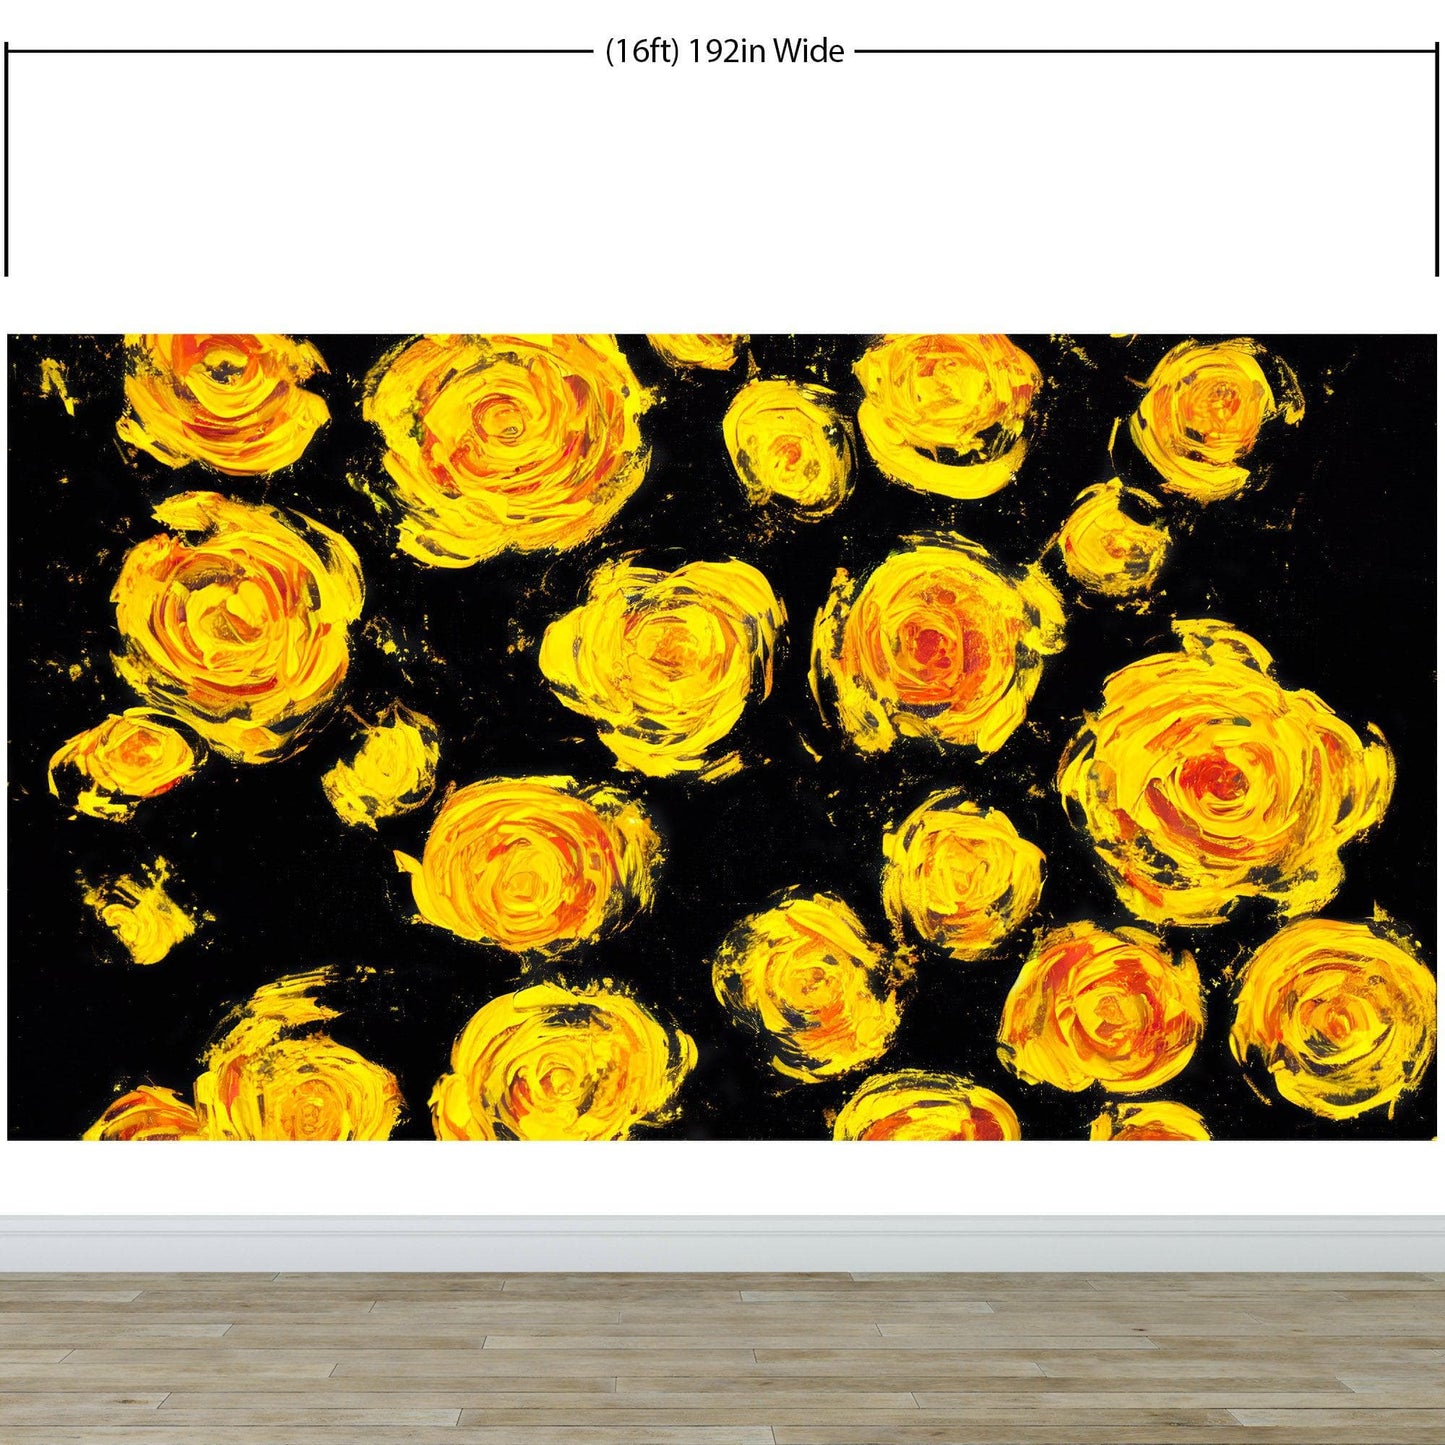 Flower Wallpaper Peel and Stick Wall Mural. Yellow Flowers on Black Background. #6499